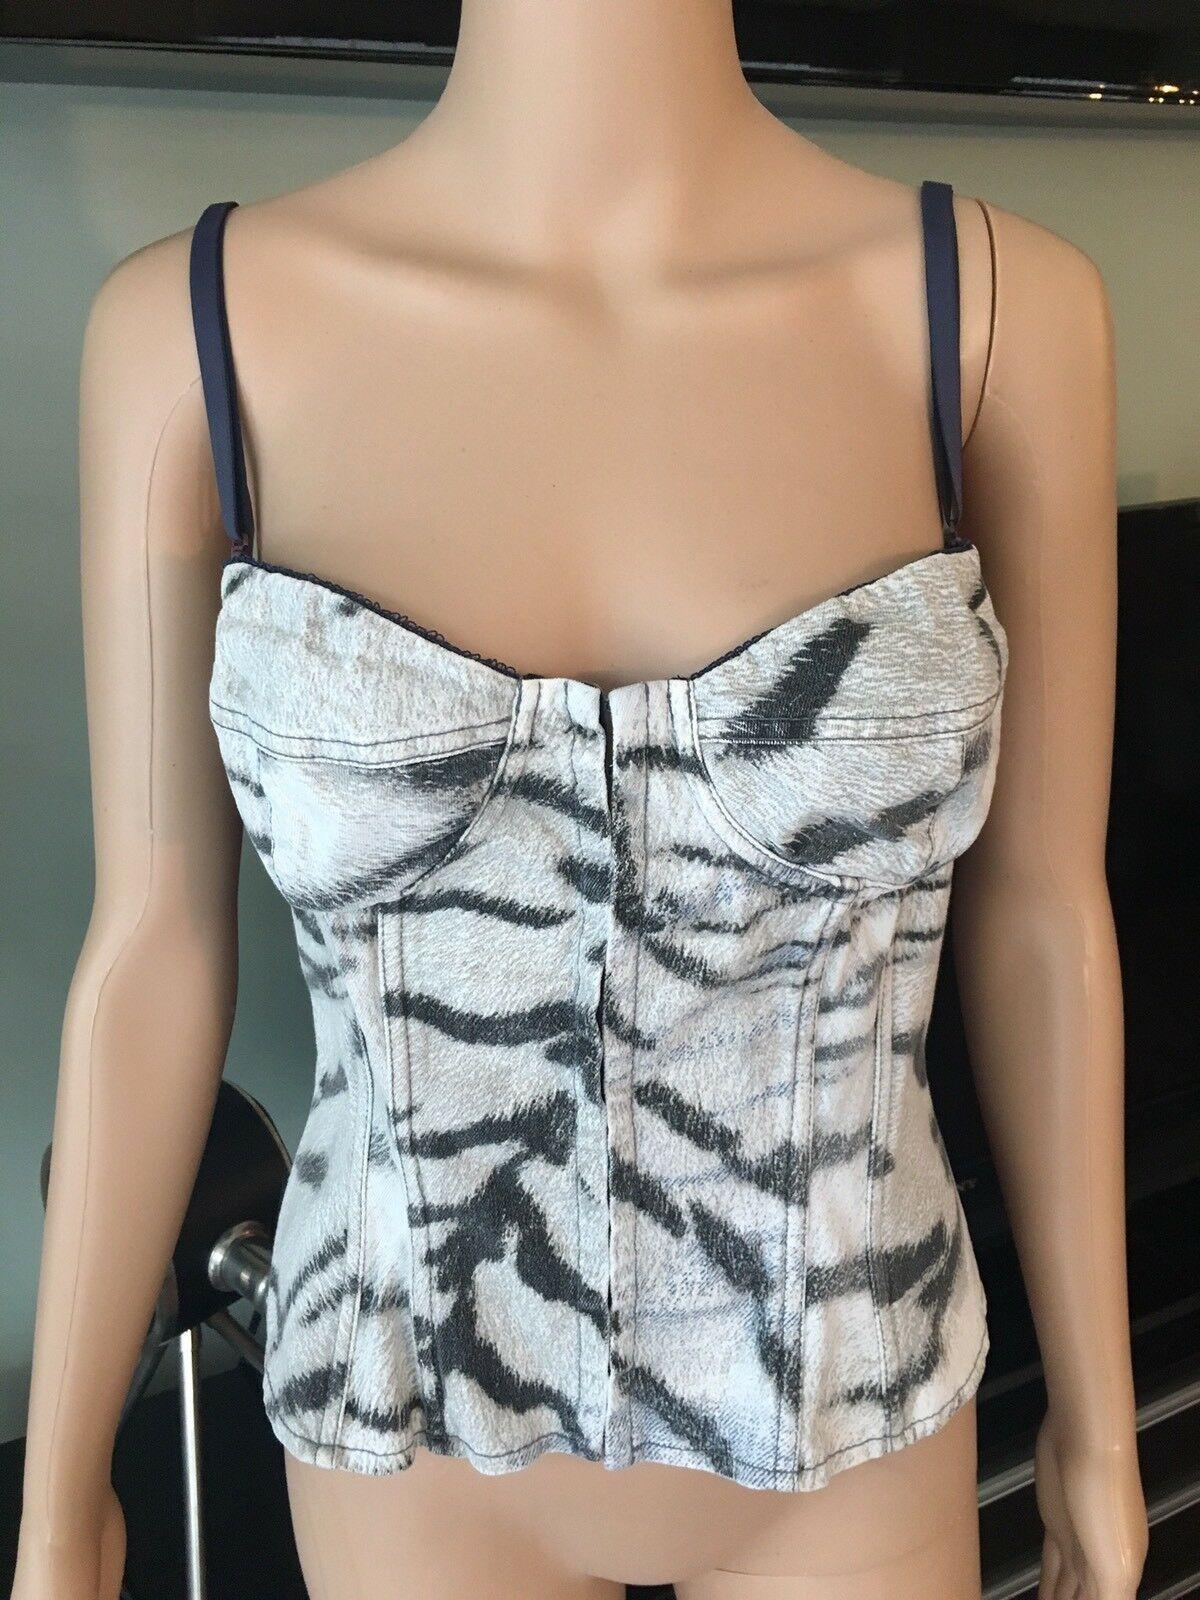 Ivory, black and medium wash blue Just Cavalli sleeveless animal print denim bustier top with sweetheart neckline, boned bodice, detachable shoulder straps and hook-and-eye closures at front. Size tag removed, estimated from measurements.

